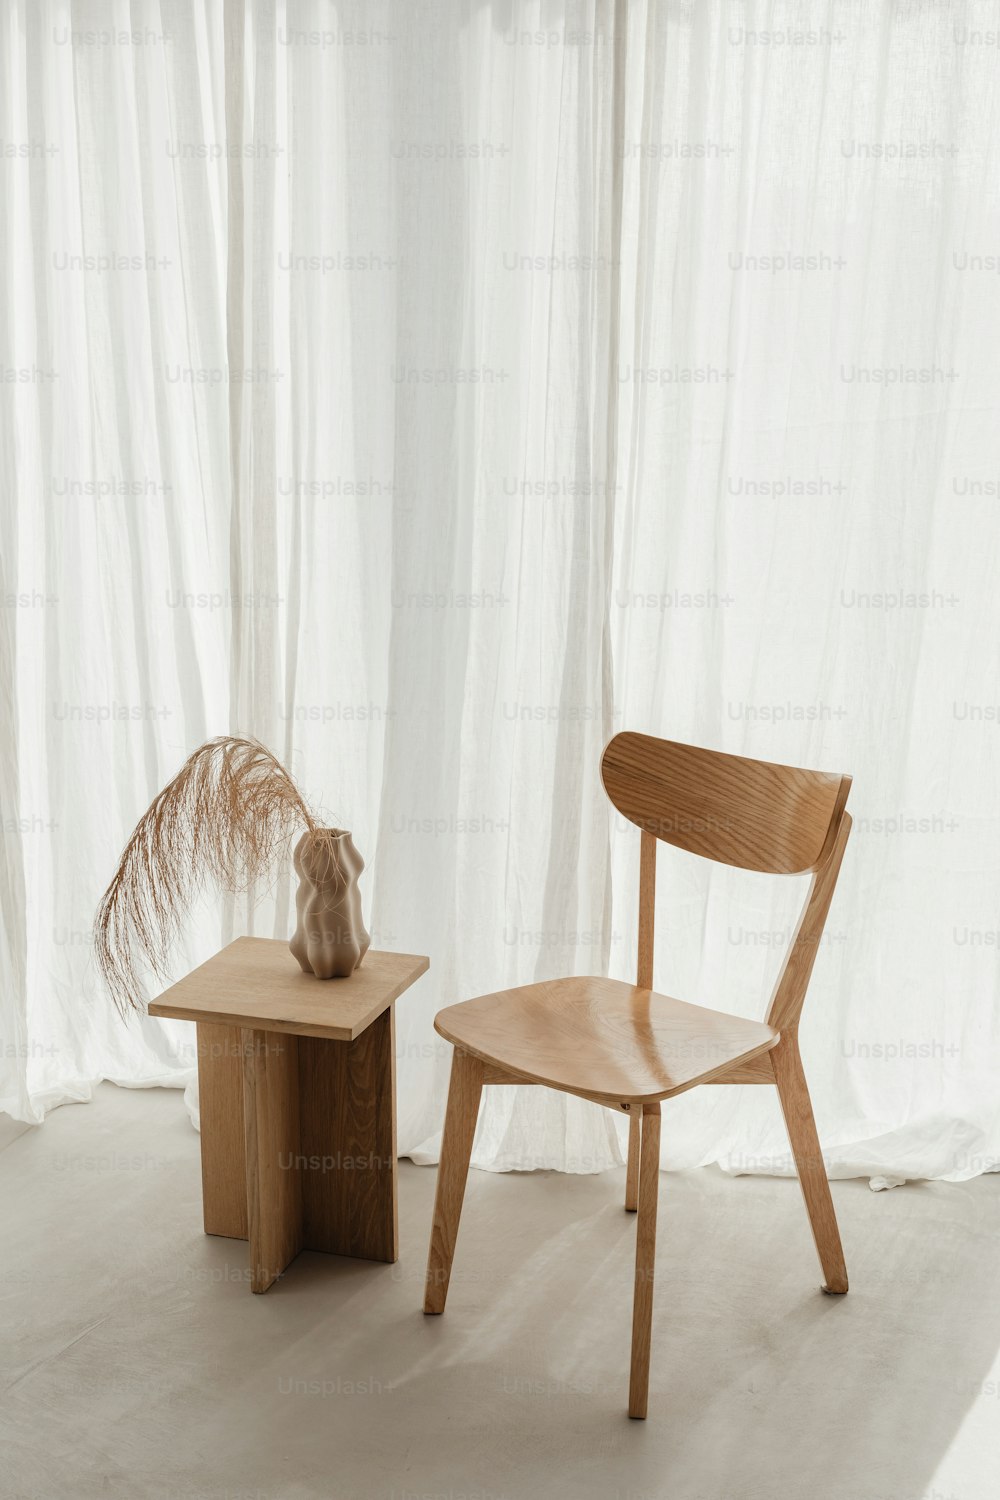 a wooden chair next to a small wooden table